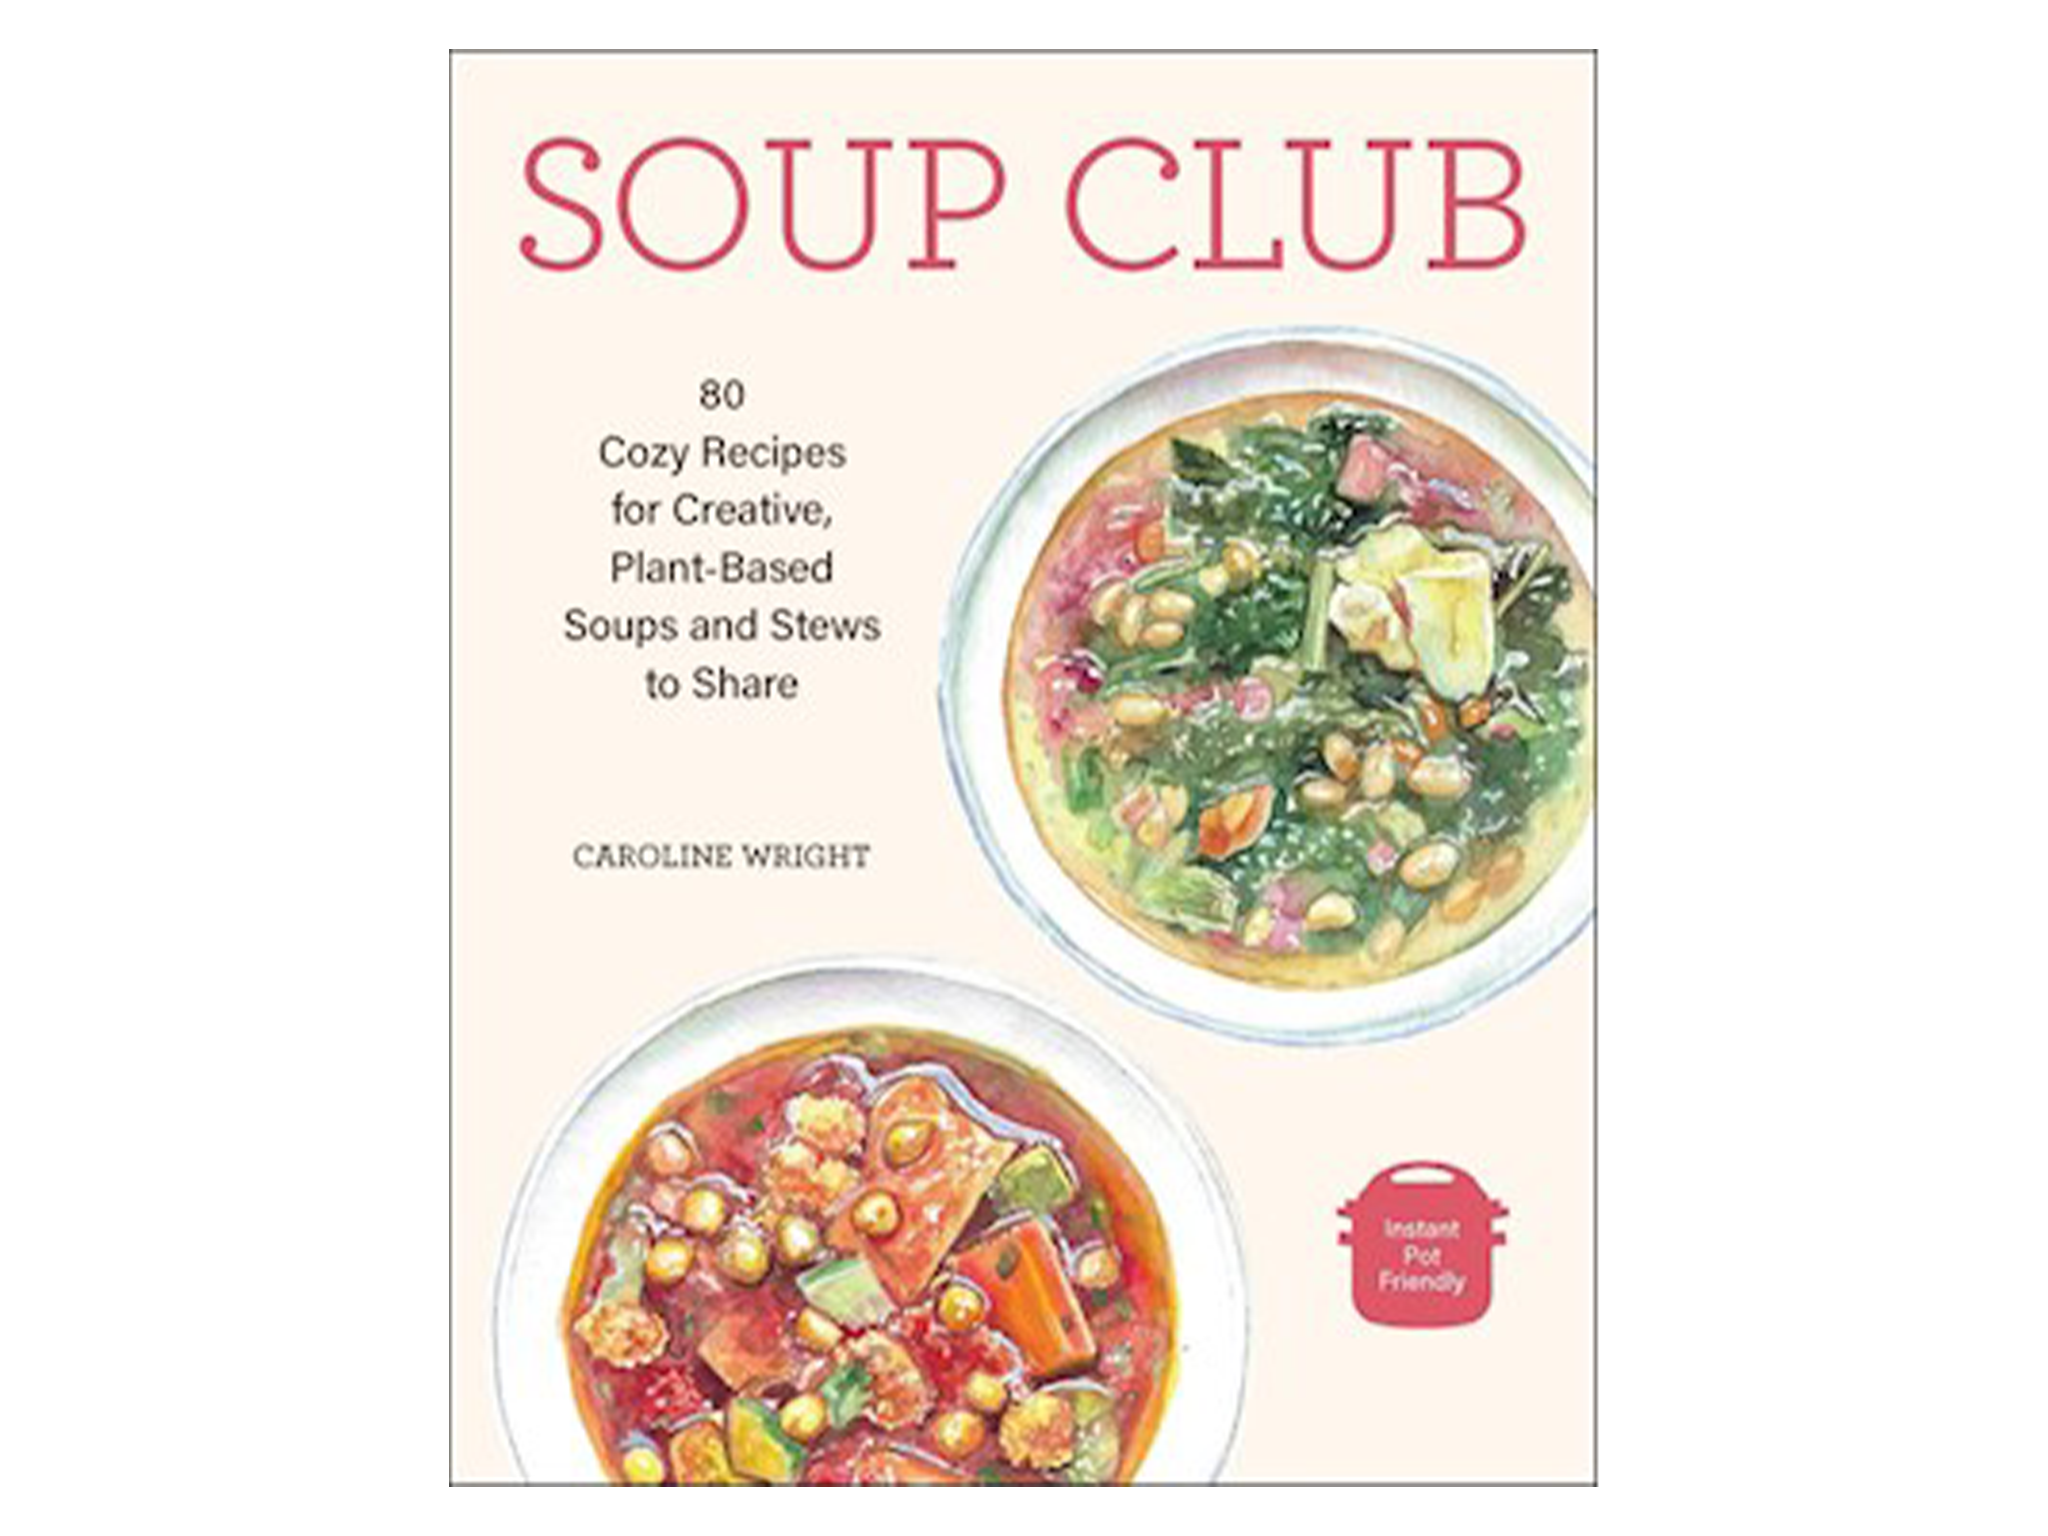 ‘SOUP CLUB’ BY CAROLINE WRIGHT, PUBLISHED BY ANDREW MCMEEL